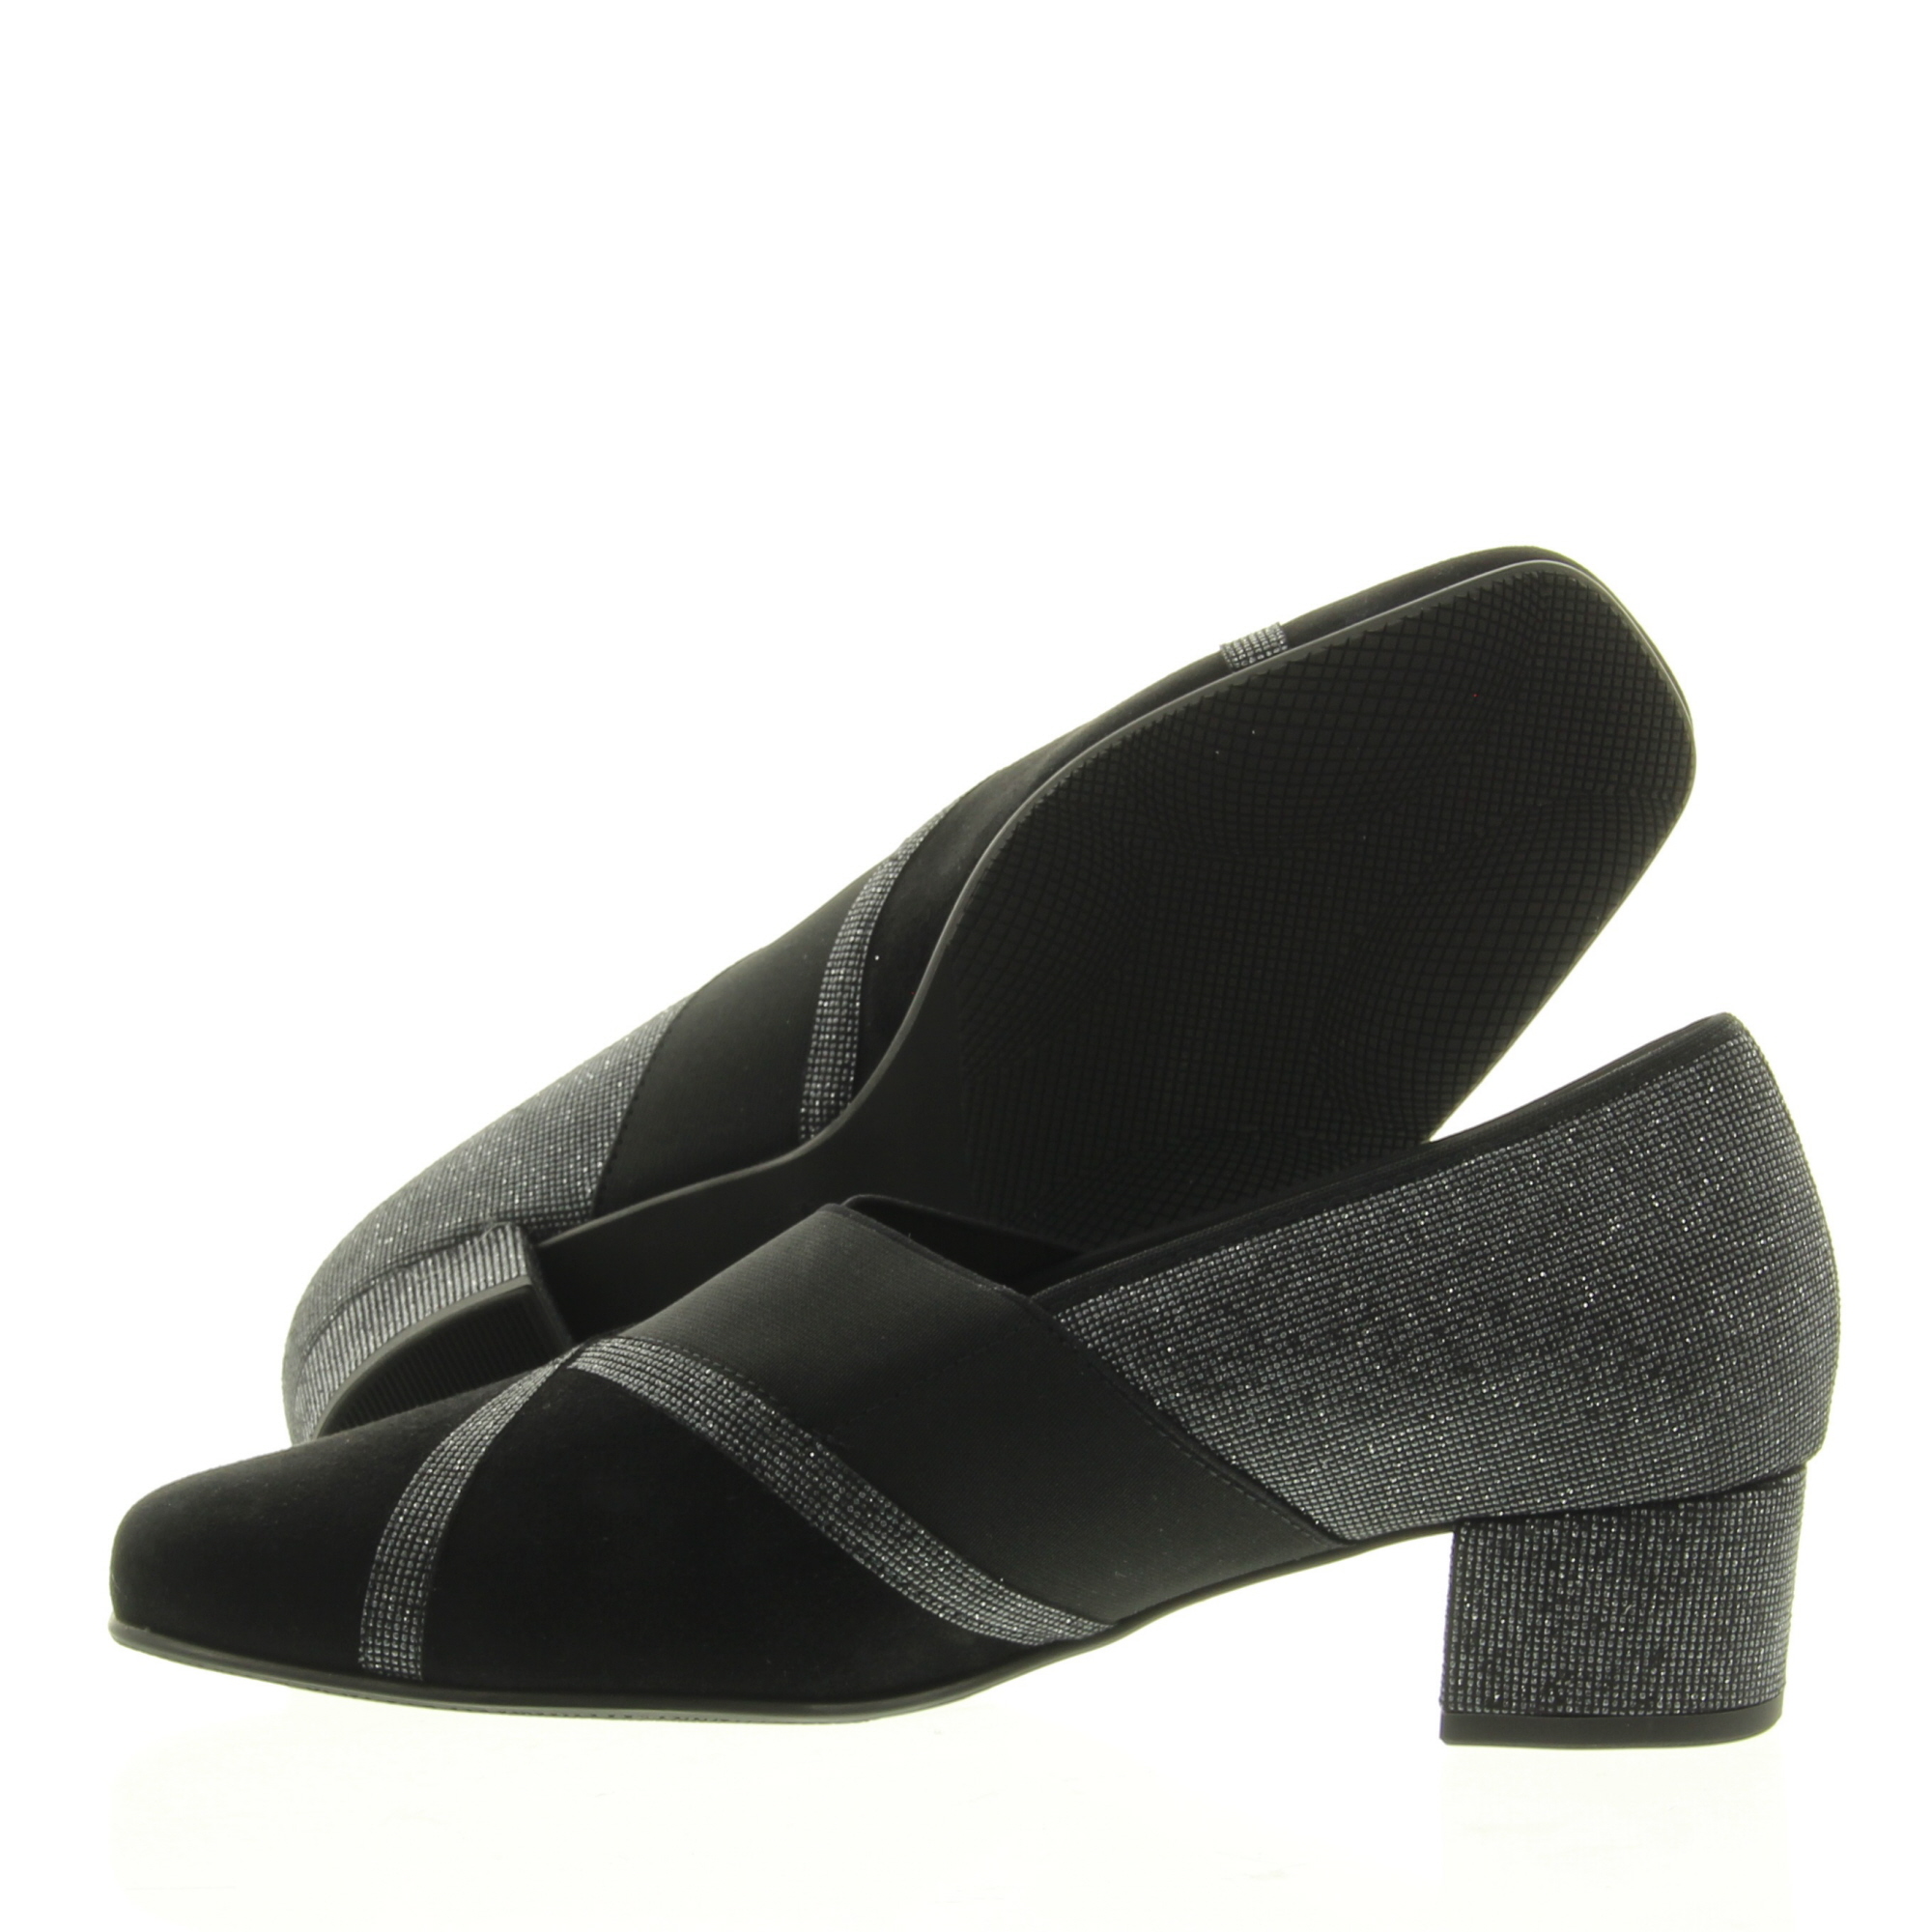 Hassia Shoes 303334 Evelyn 0100 Schwarz